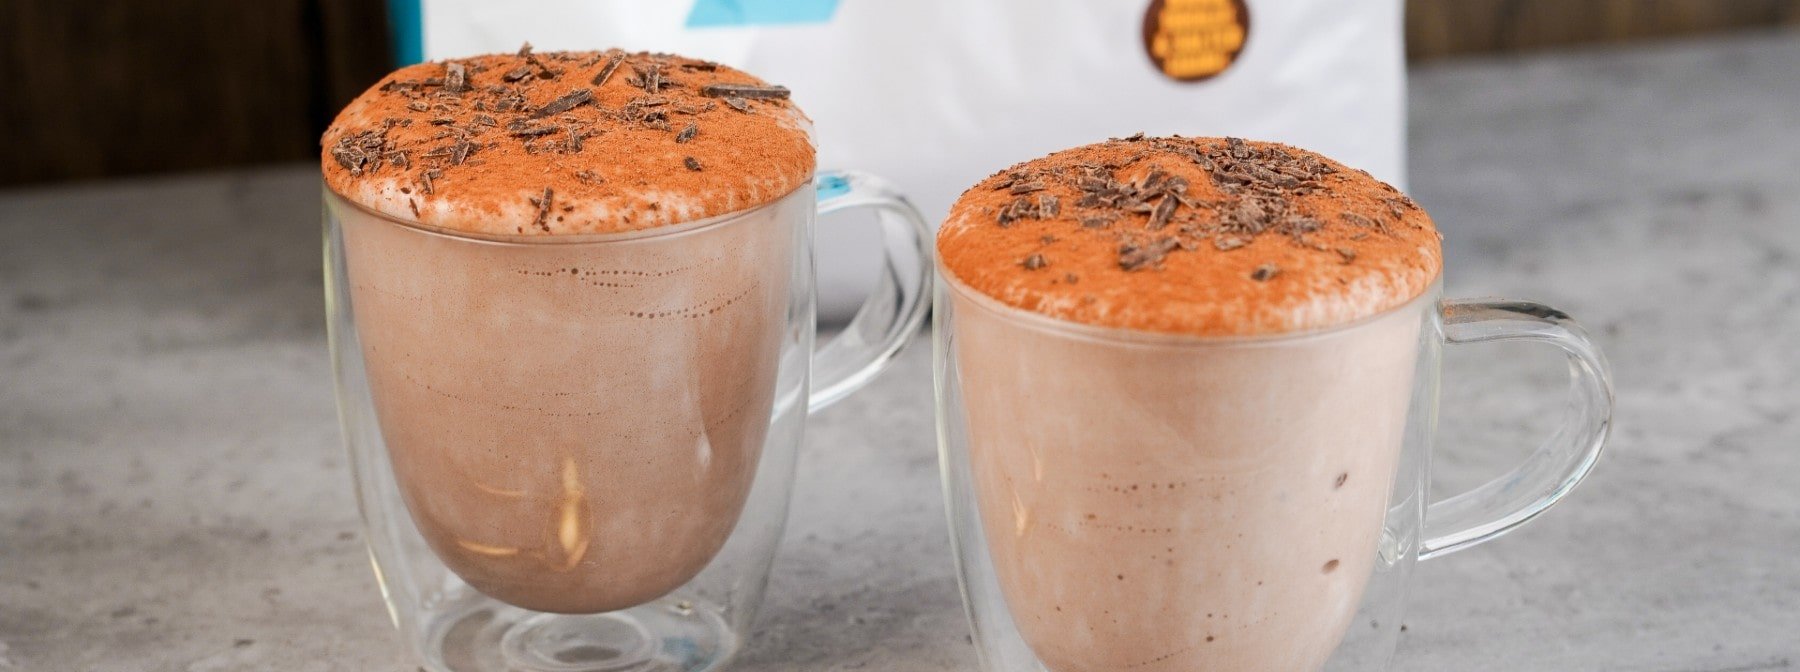 High-Protein Chocolate Cloud Pudding